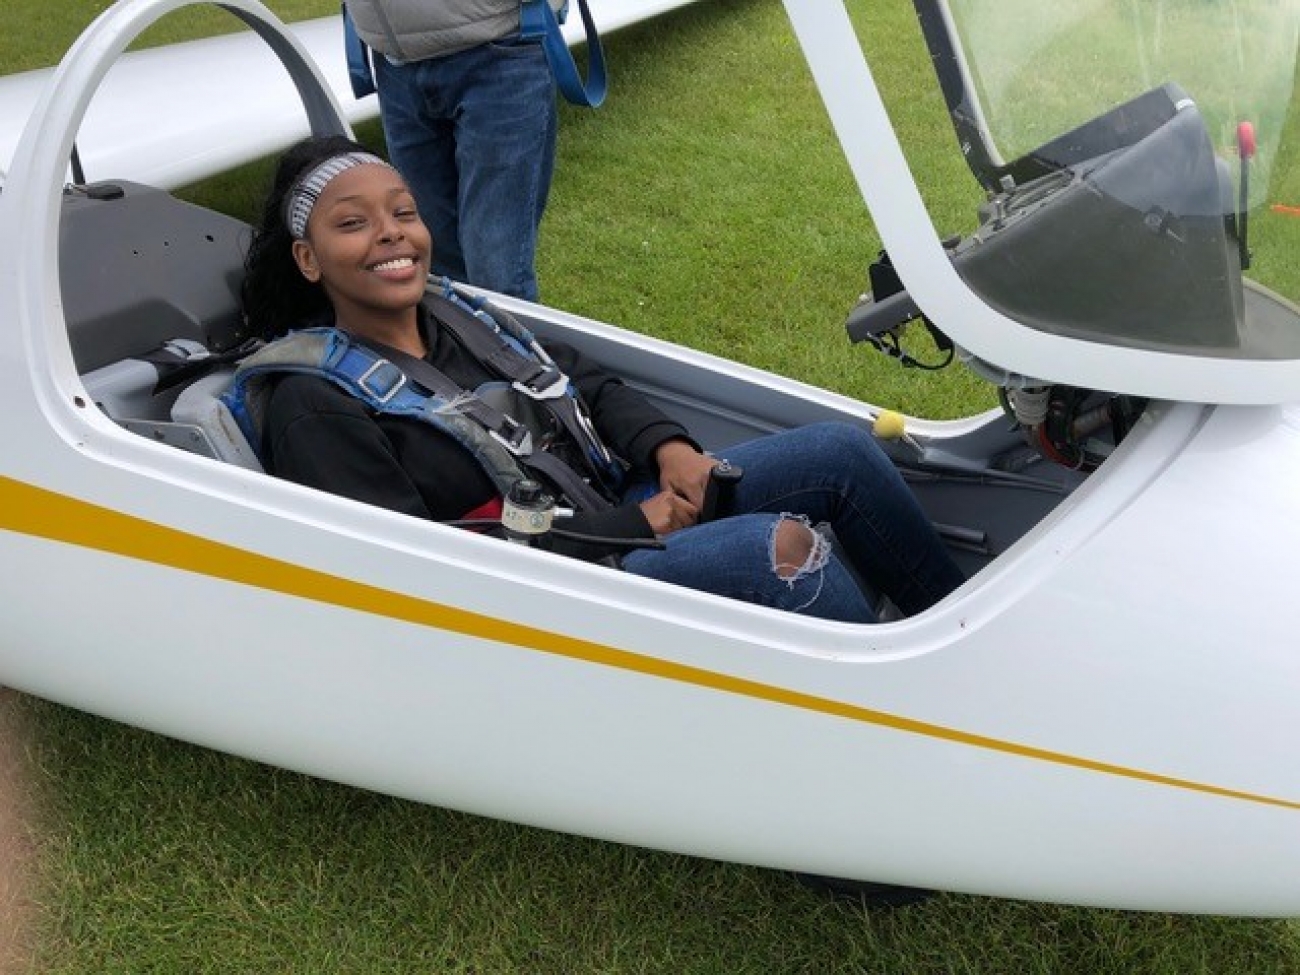 II. Benefits of Joining a Glider Flying Club